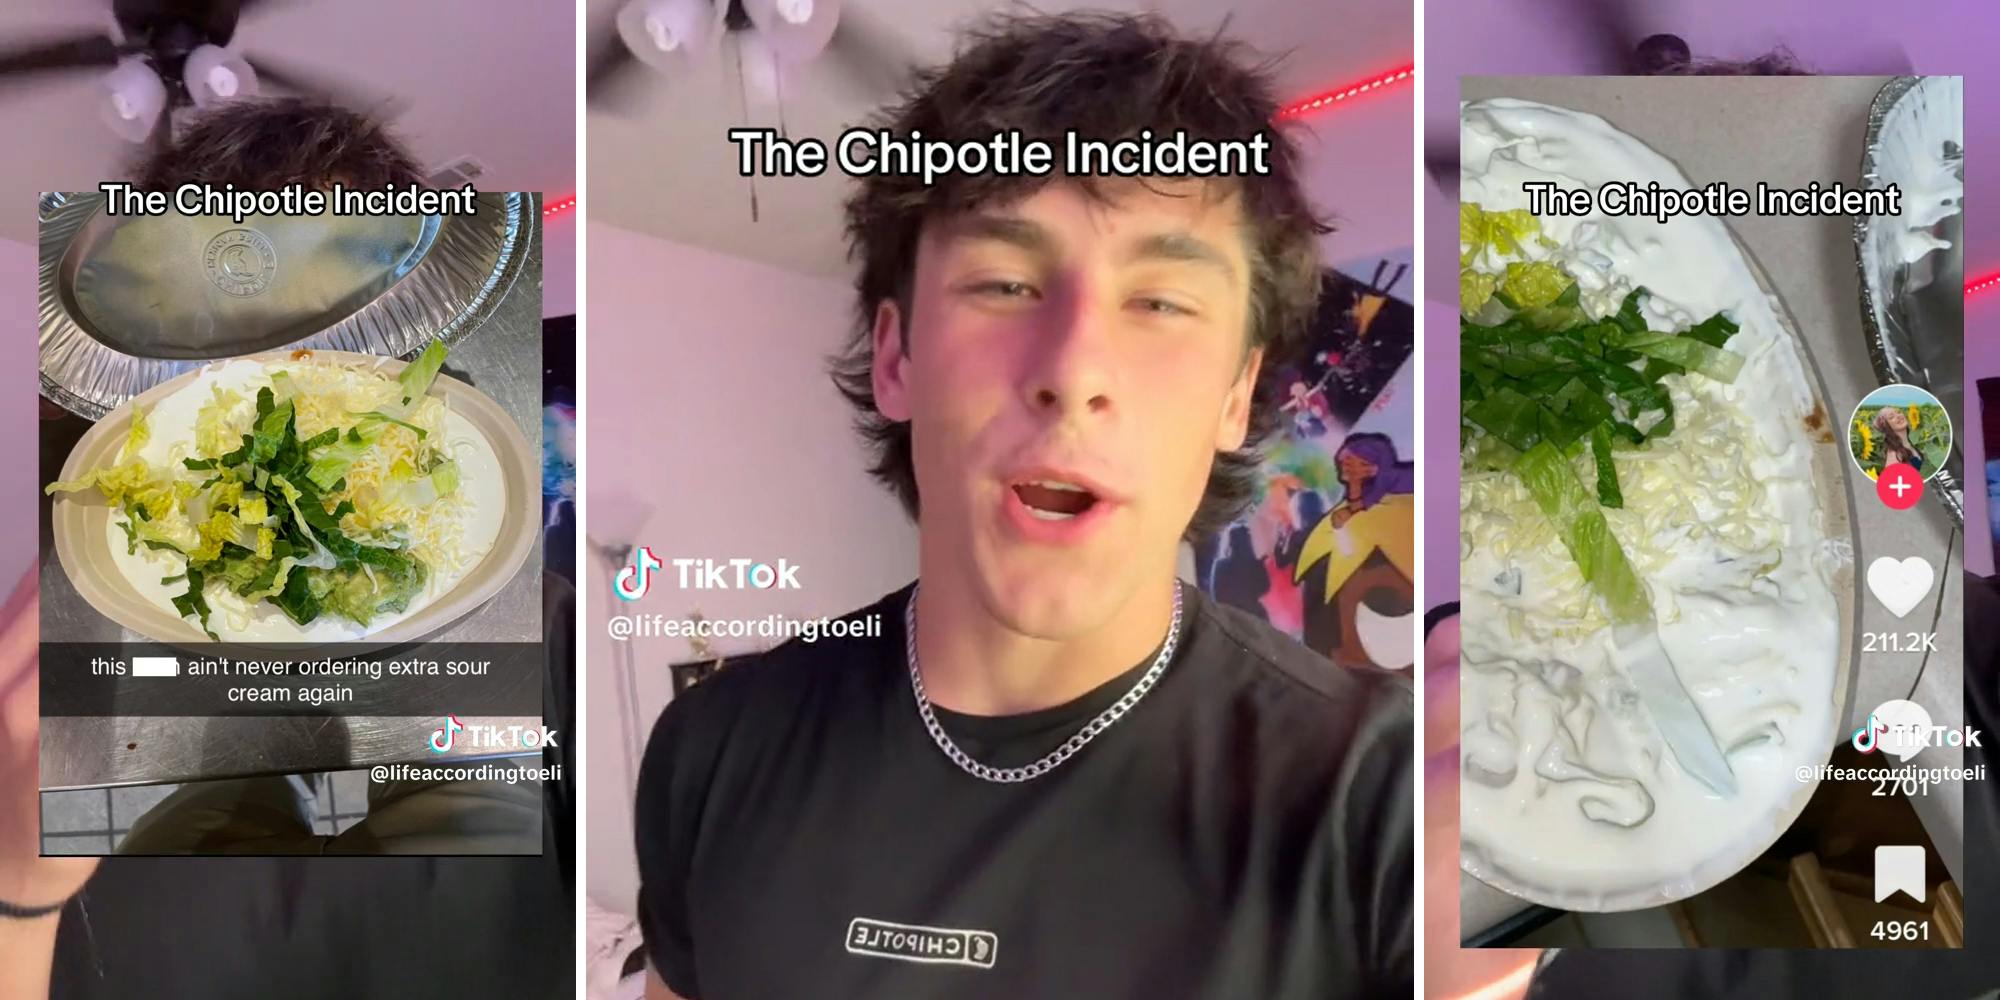 young man with bowl of sour cream and caption "The Chipotle Incident"